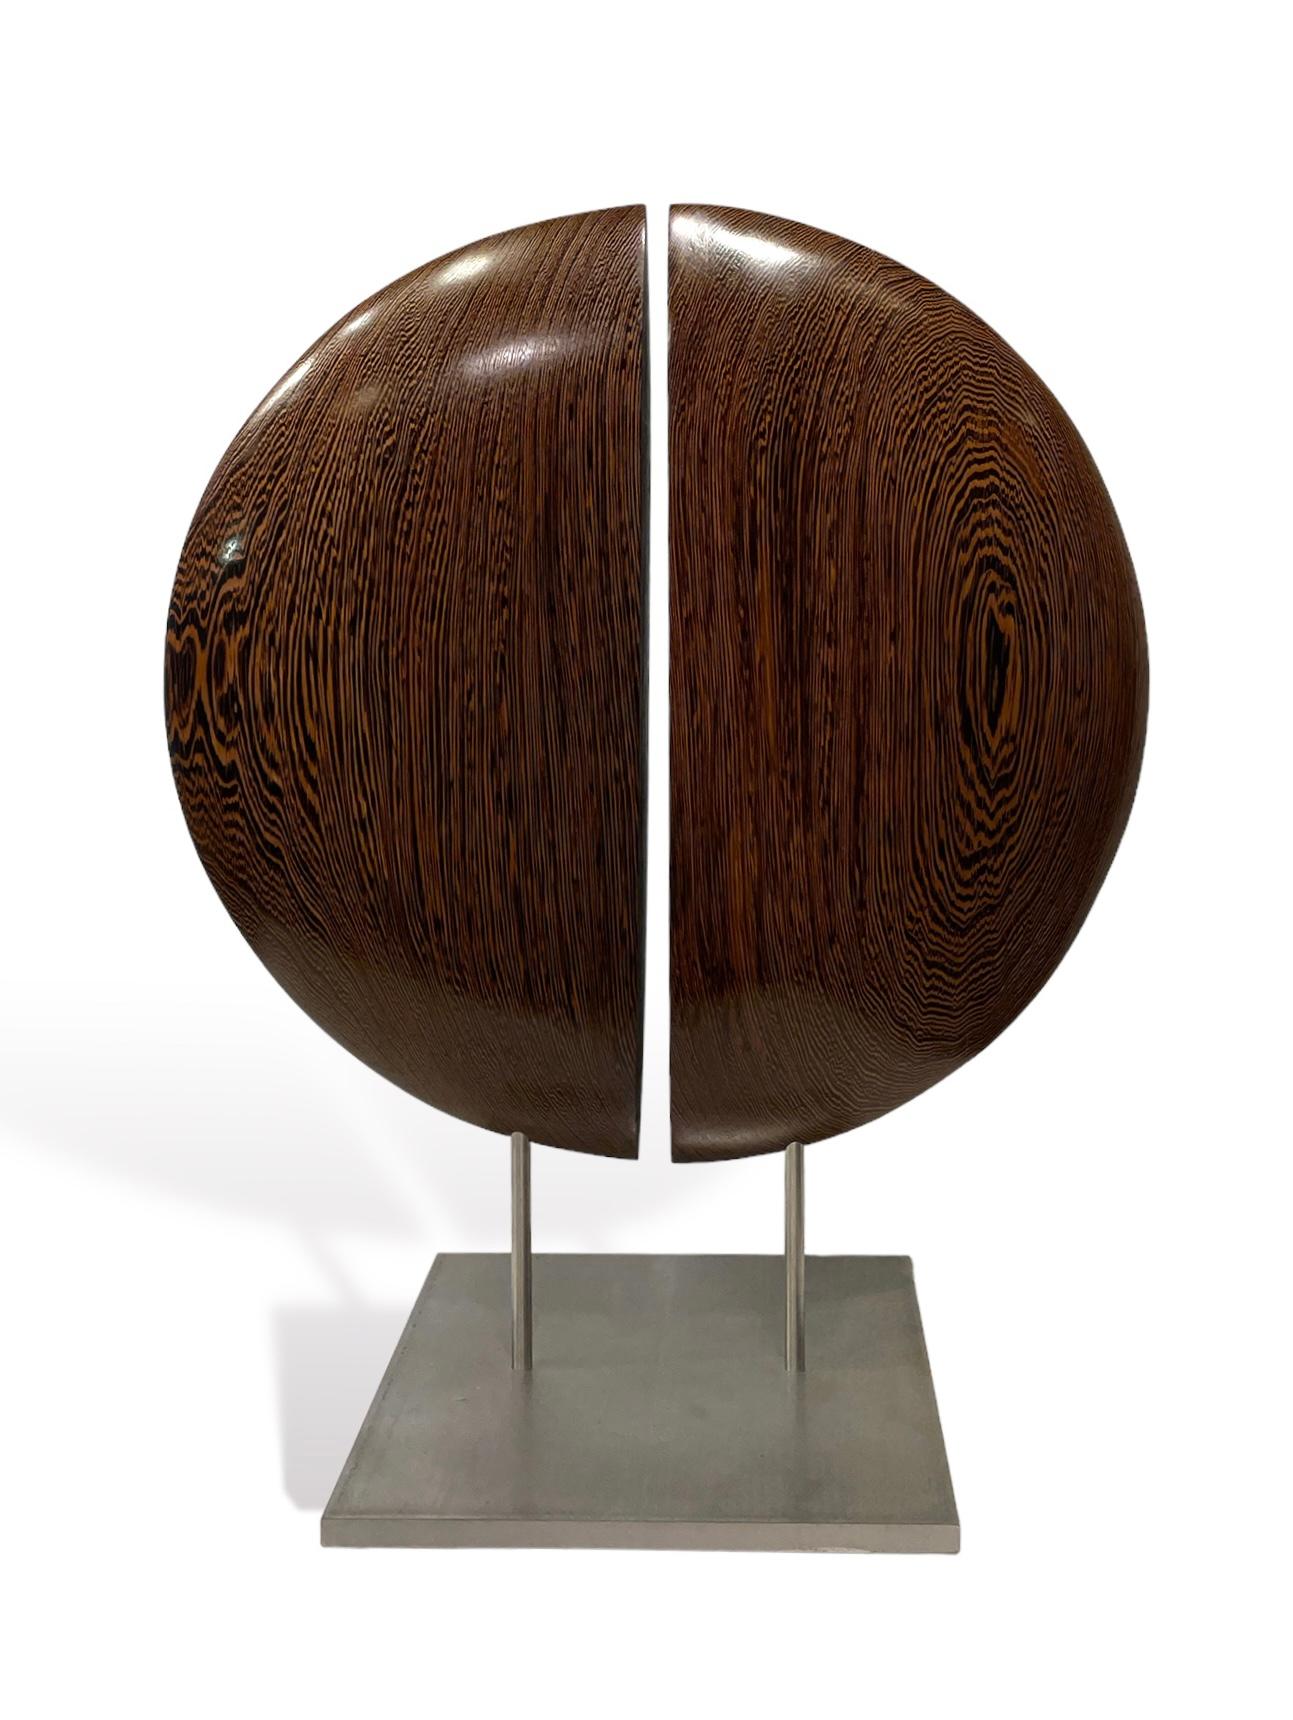 Hand-Carved Wenge Wood Double Half-Moon Hand Carved Sculpture Mounted on Steel Base